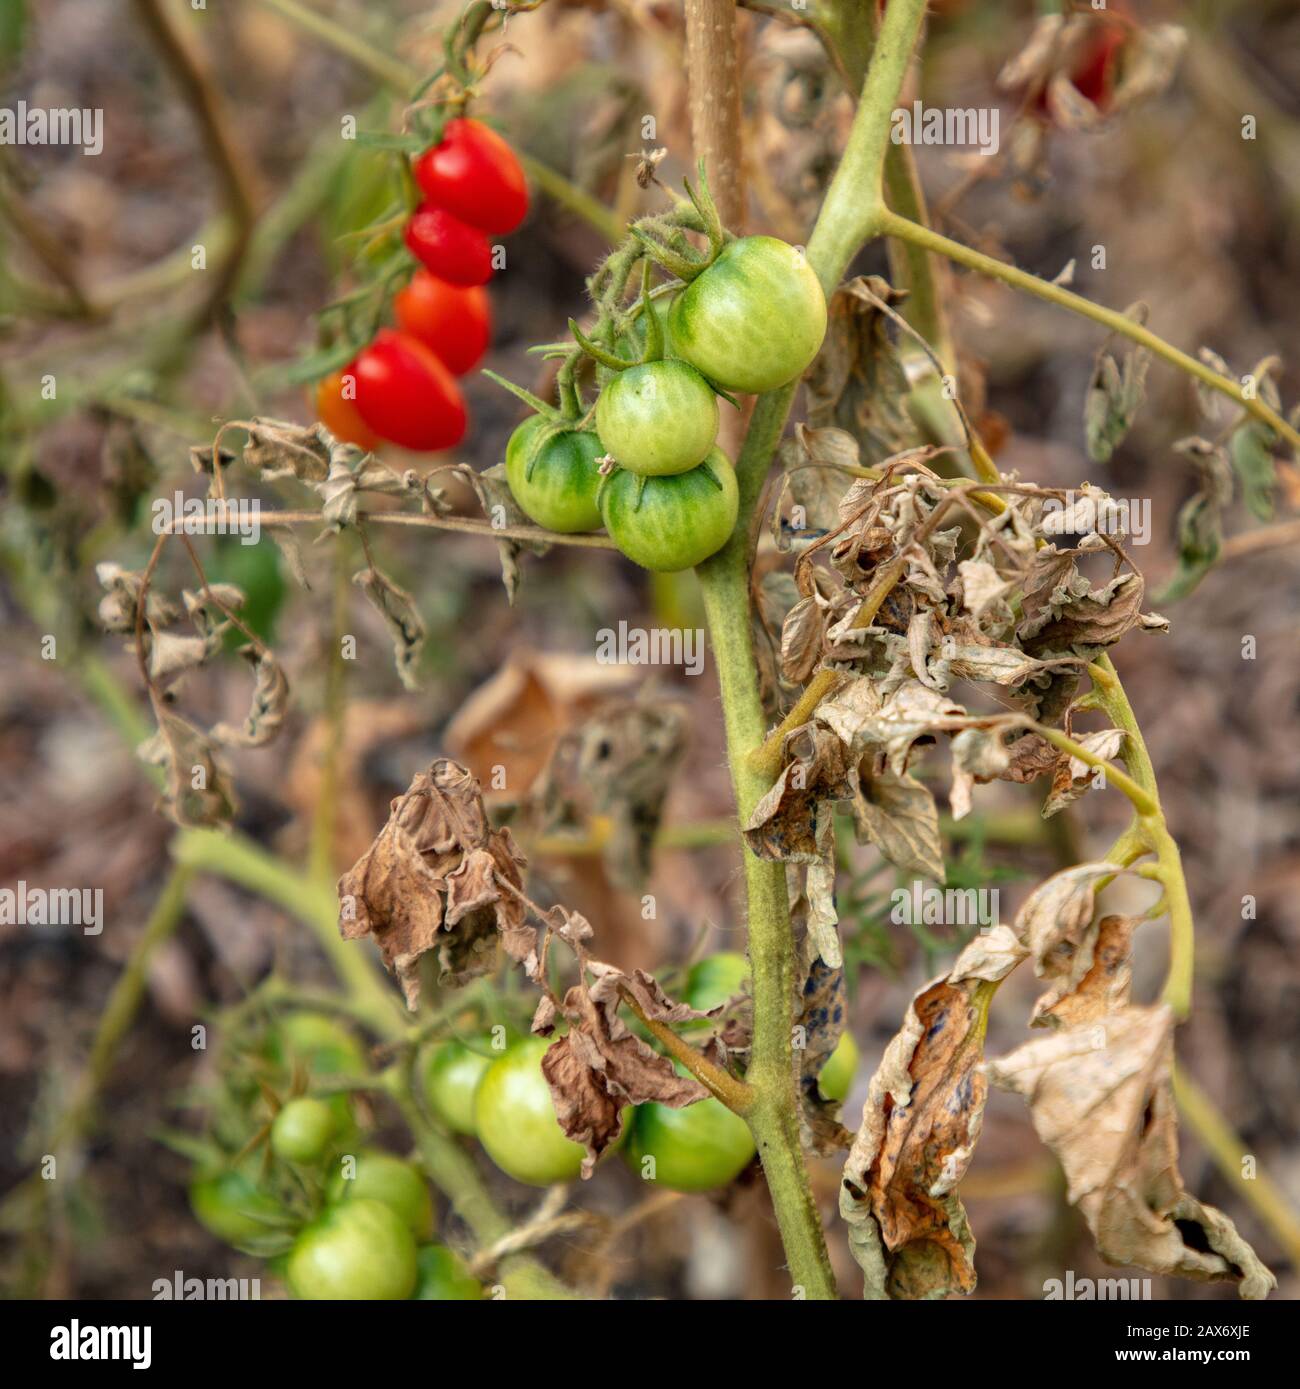 Outdoor tomato plants seen with Fusarium wilt affecting the leaves. Stock Photo